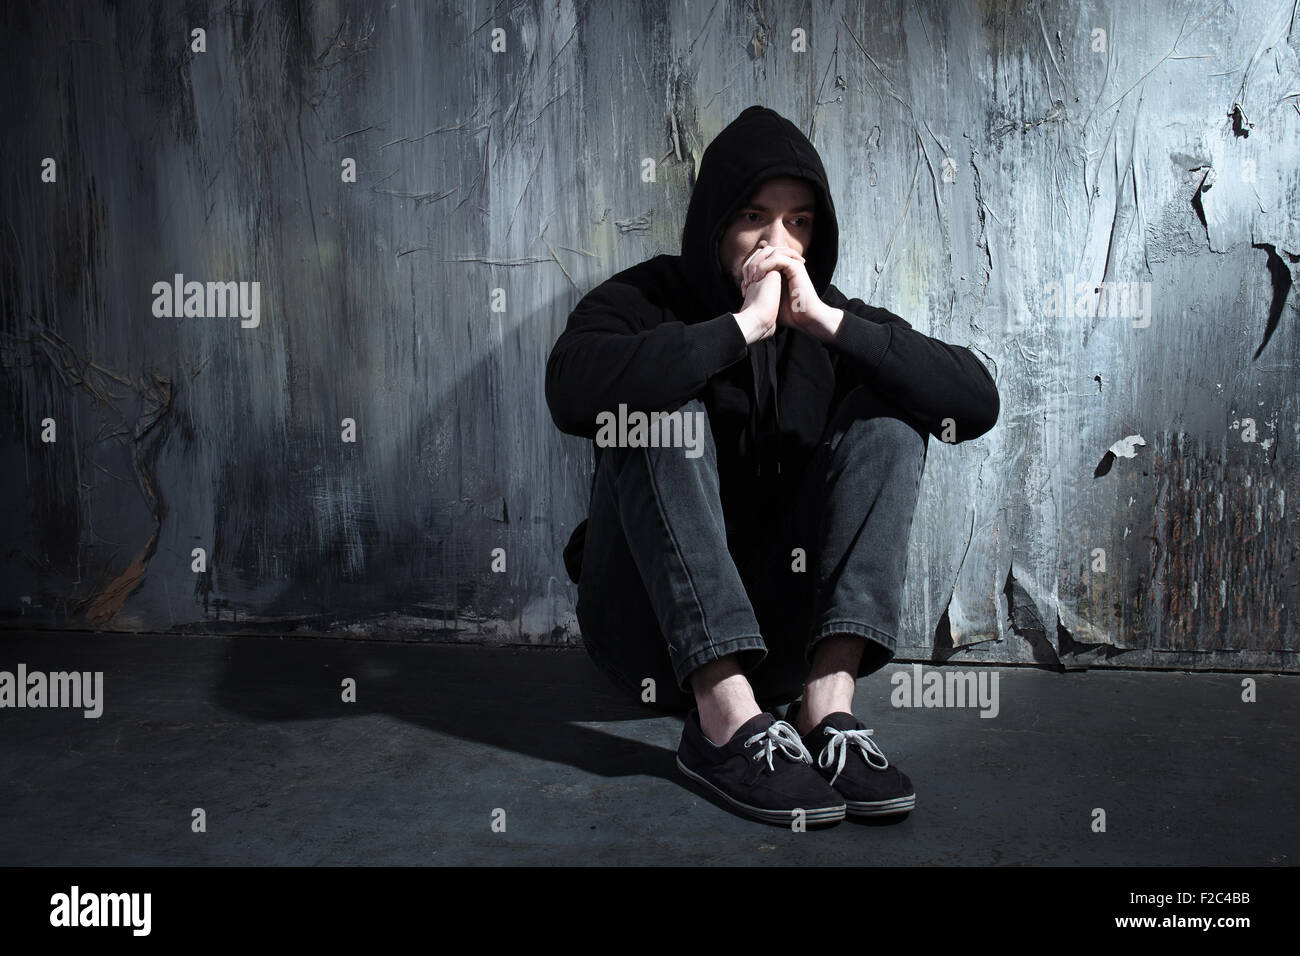 Concept for drug addiction and despair Stock Photo